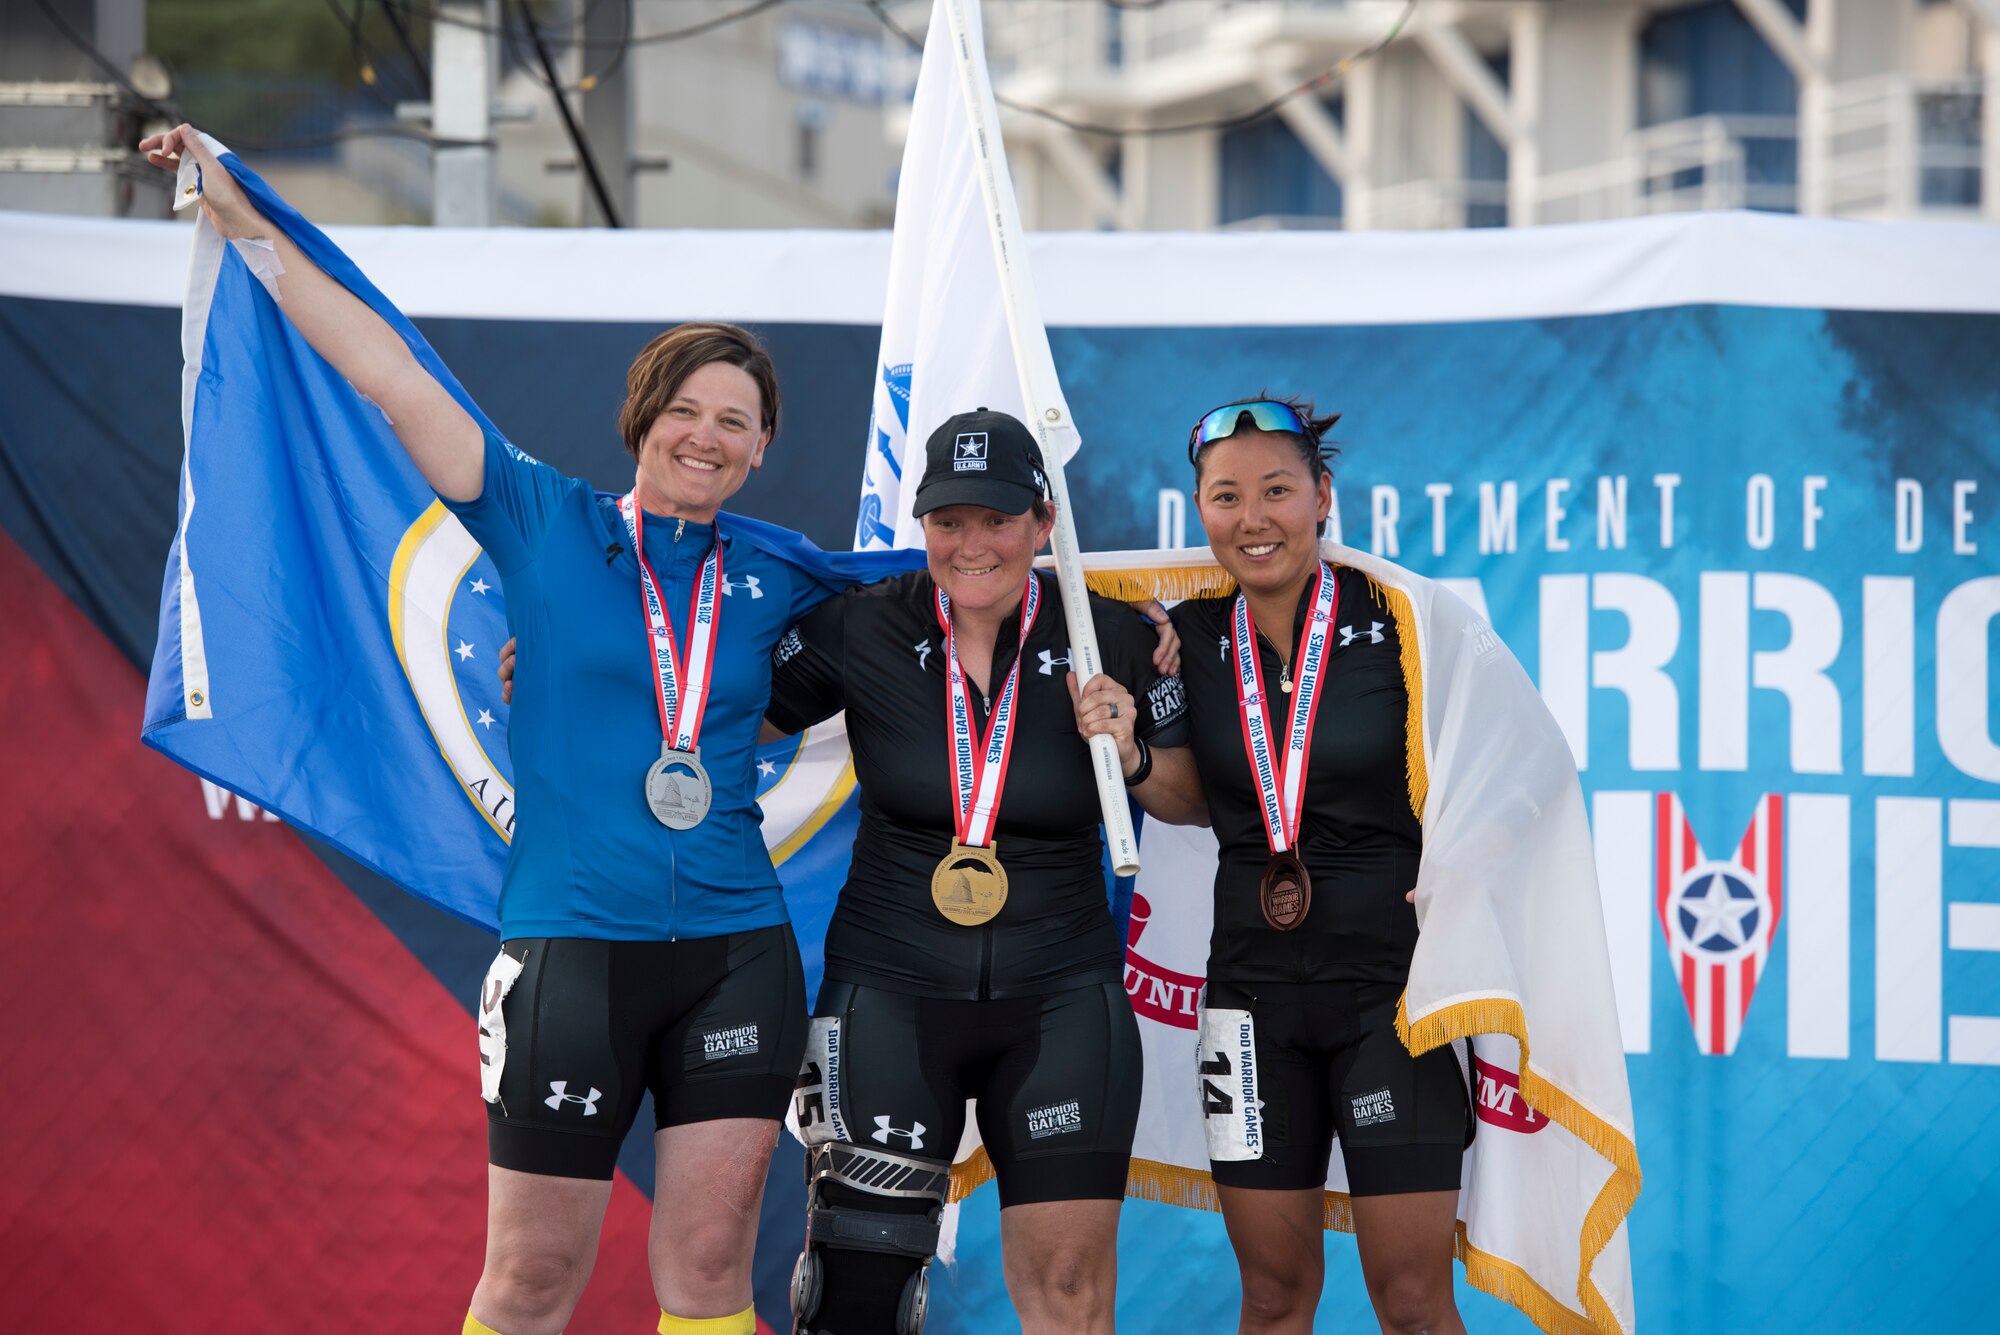 (From left to right) Master Sgt. Lisa Goad, Team Air Force athlete, Sgt. 1st Class Tiffany Rodriguez-Rexroad and Sgt. 1st Class Hyoshin Cha, Team Army athletes, pose for a photo after a hand-cycling race at the U.S. Air Force Academy in Colorado Springs, Colo. on June 6, 2018. Hand cycling was one of the adaptive sports for athletes with lower body limitations featured at the 2018 Department of Defense Warrior Games. (Courtesy photo)